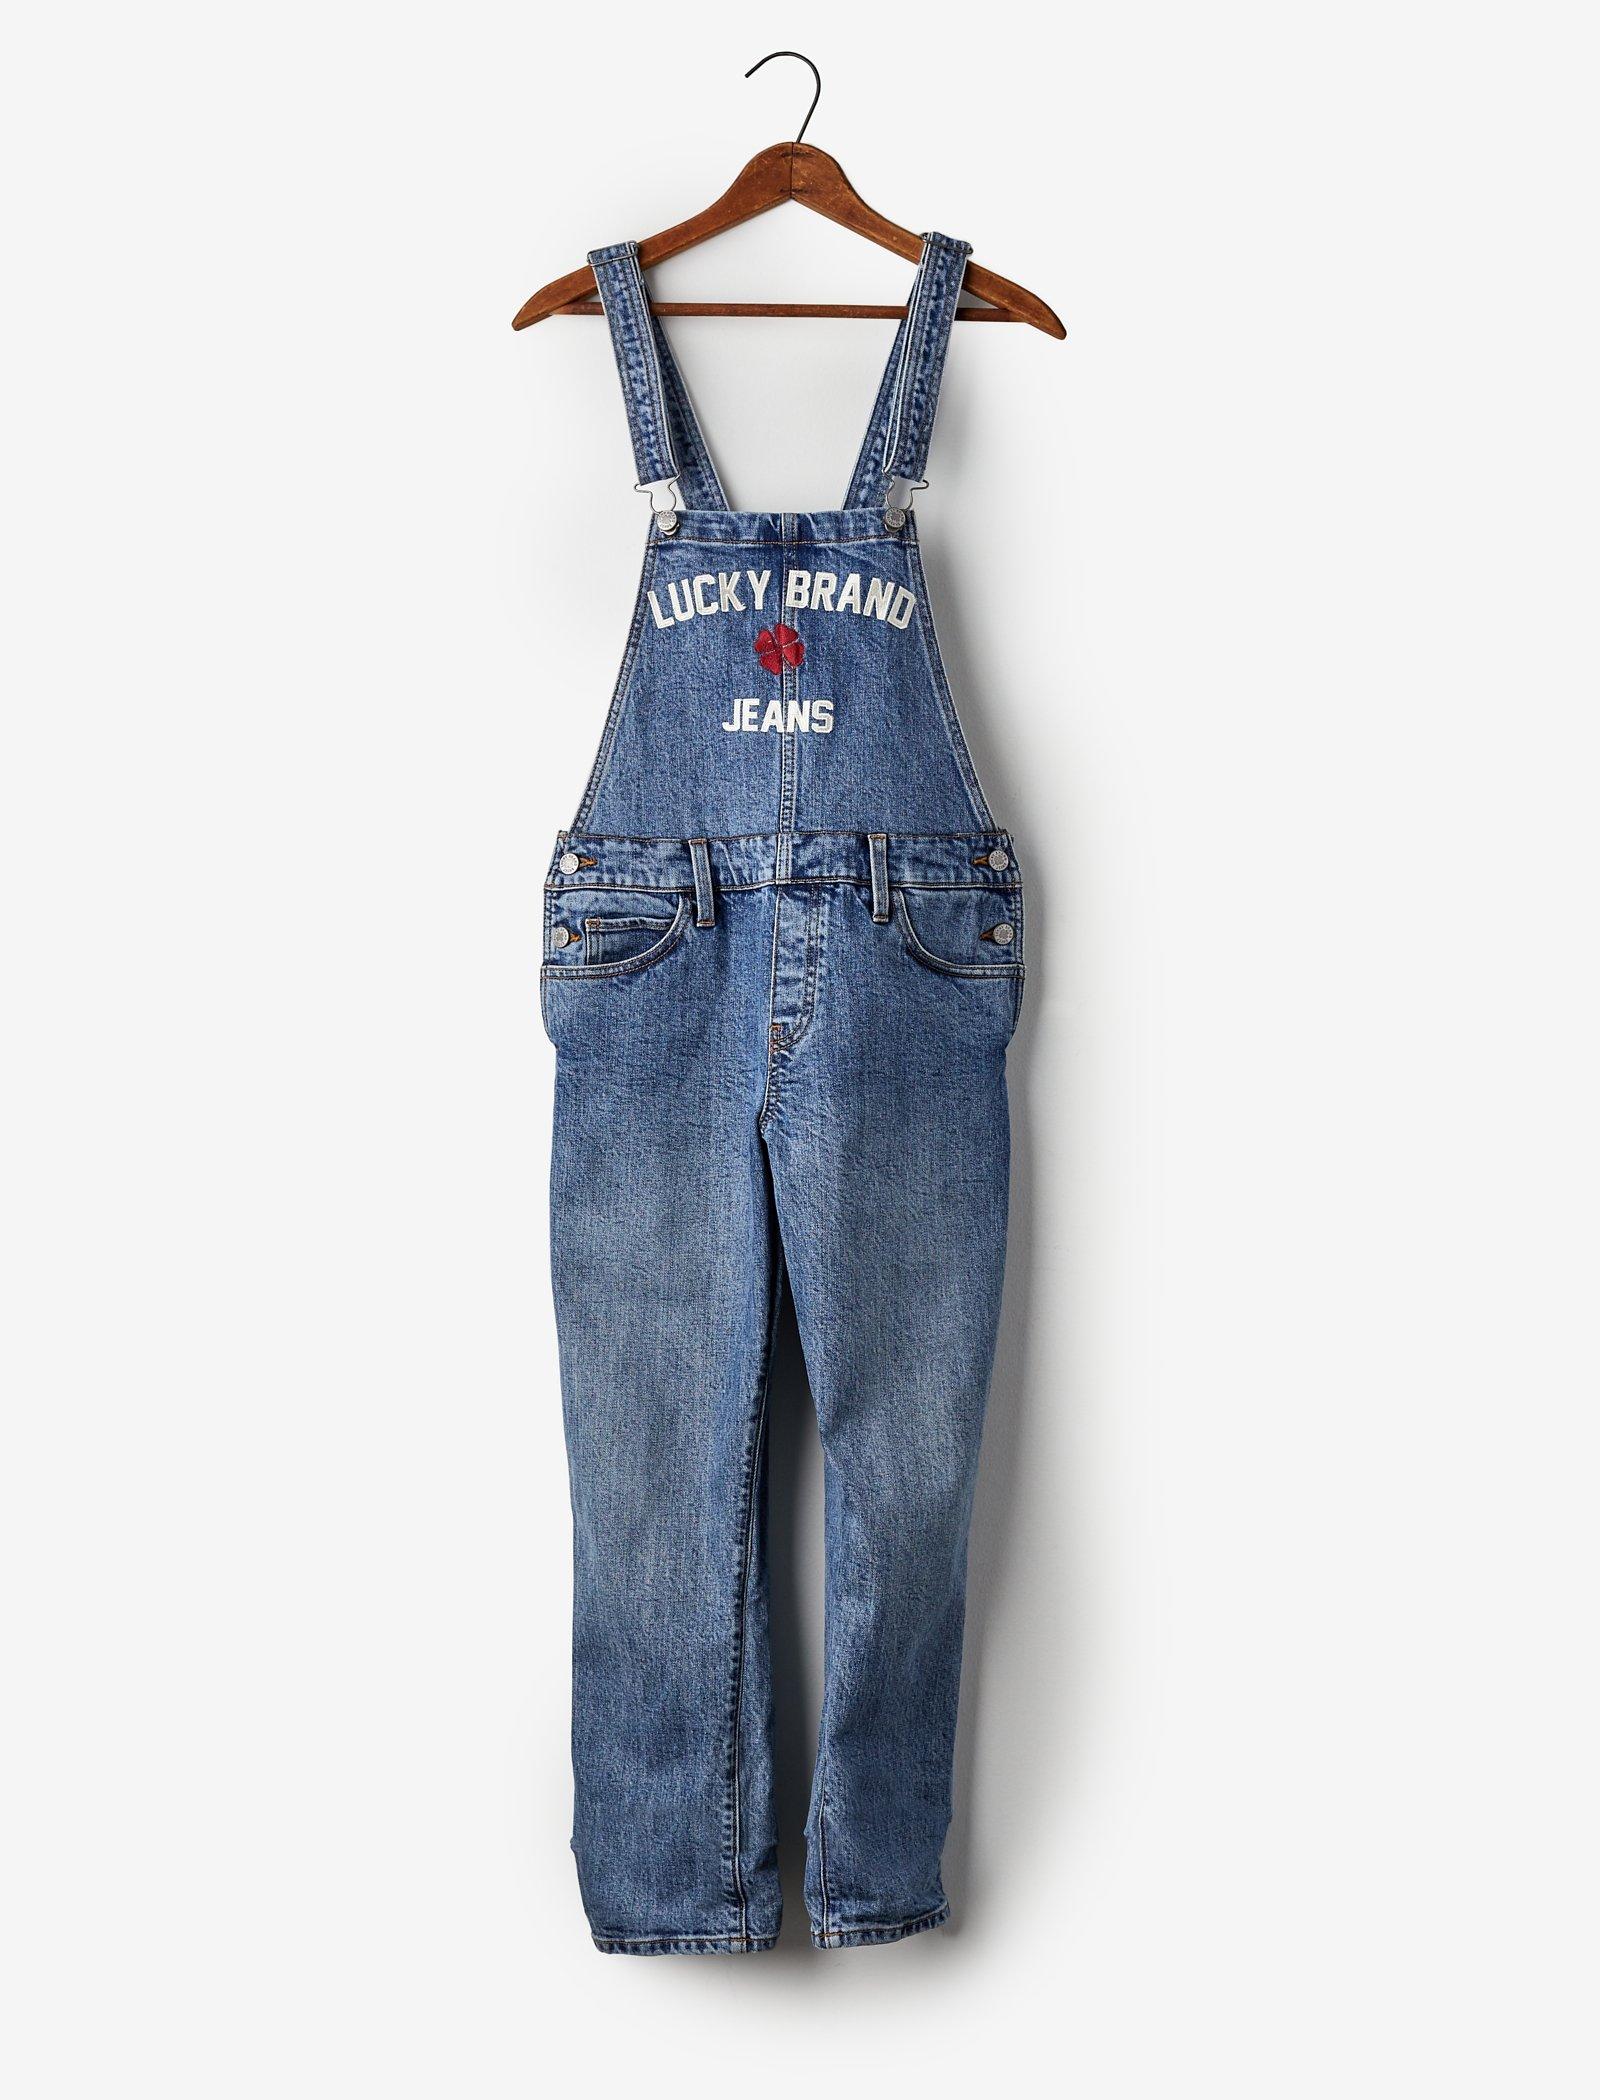 jeans overalls canada